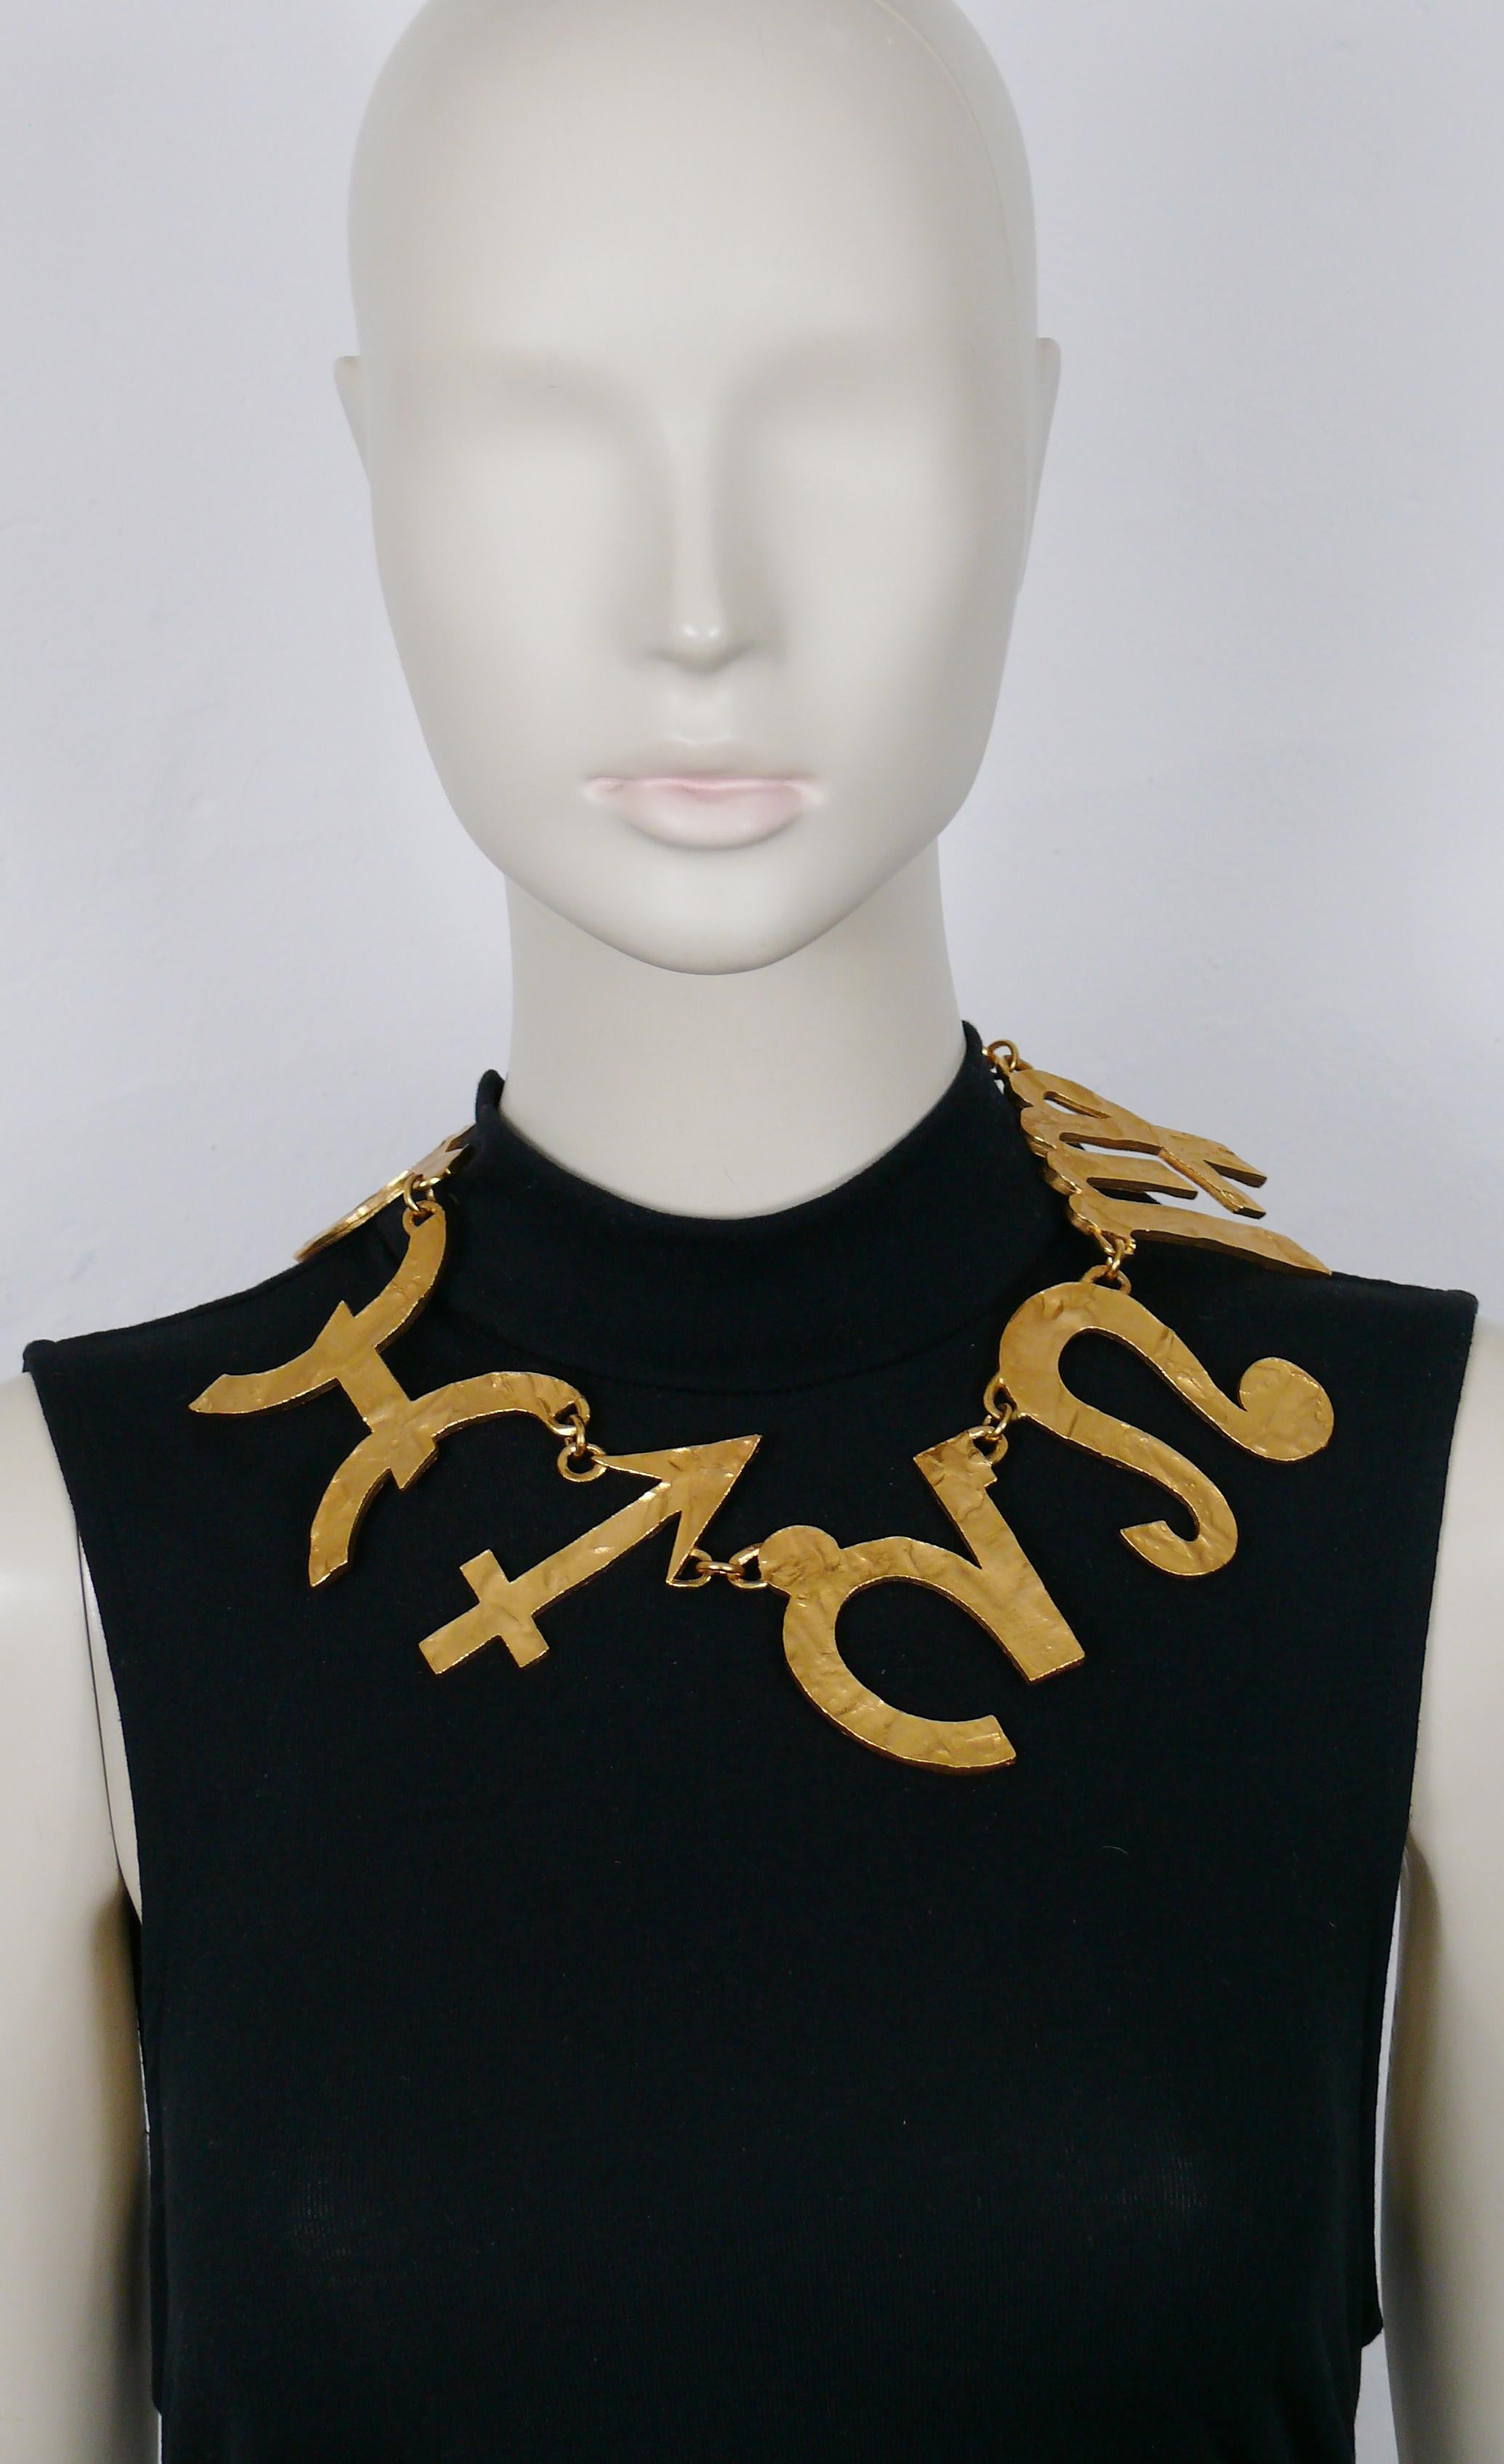 BICHE DE BERE vintage massive limited edition gold tone necklace featuring 6 hammered zodiac symbols.

Hook closure.

Embossed BICHE DE BERE.
Numbered 28/147.

Indicative measurements : length approx. 46.5 cm (18.31 inches) / max. width approx. 6.5